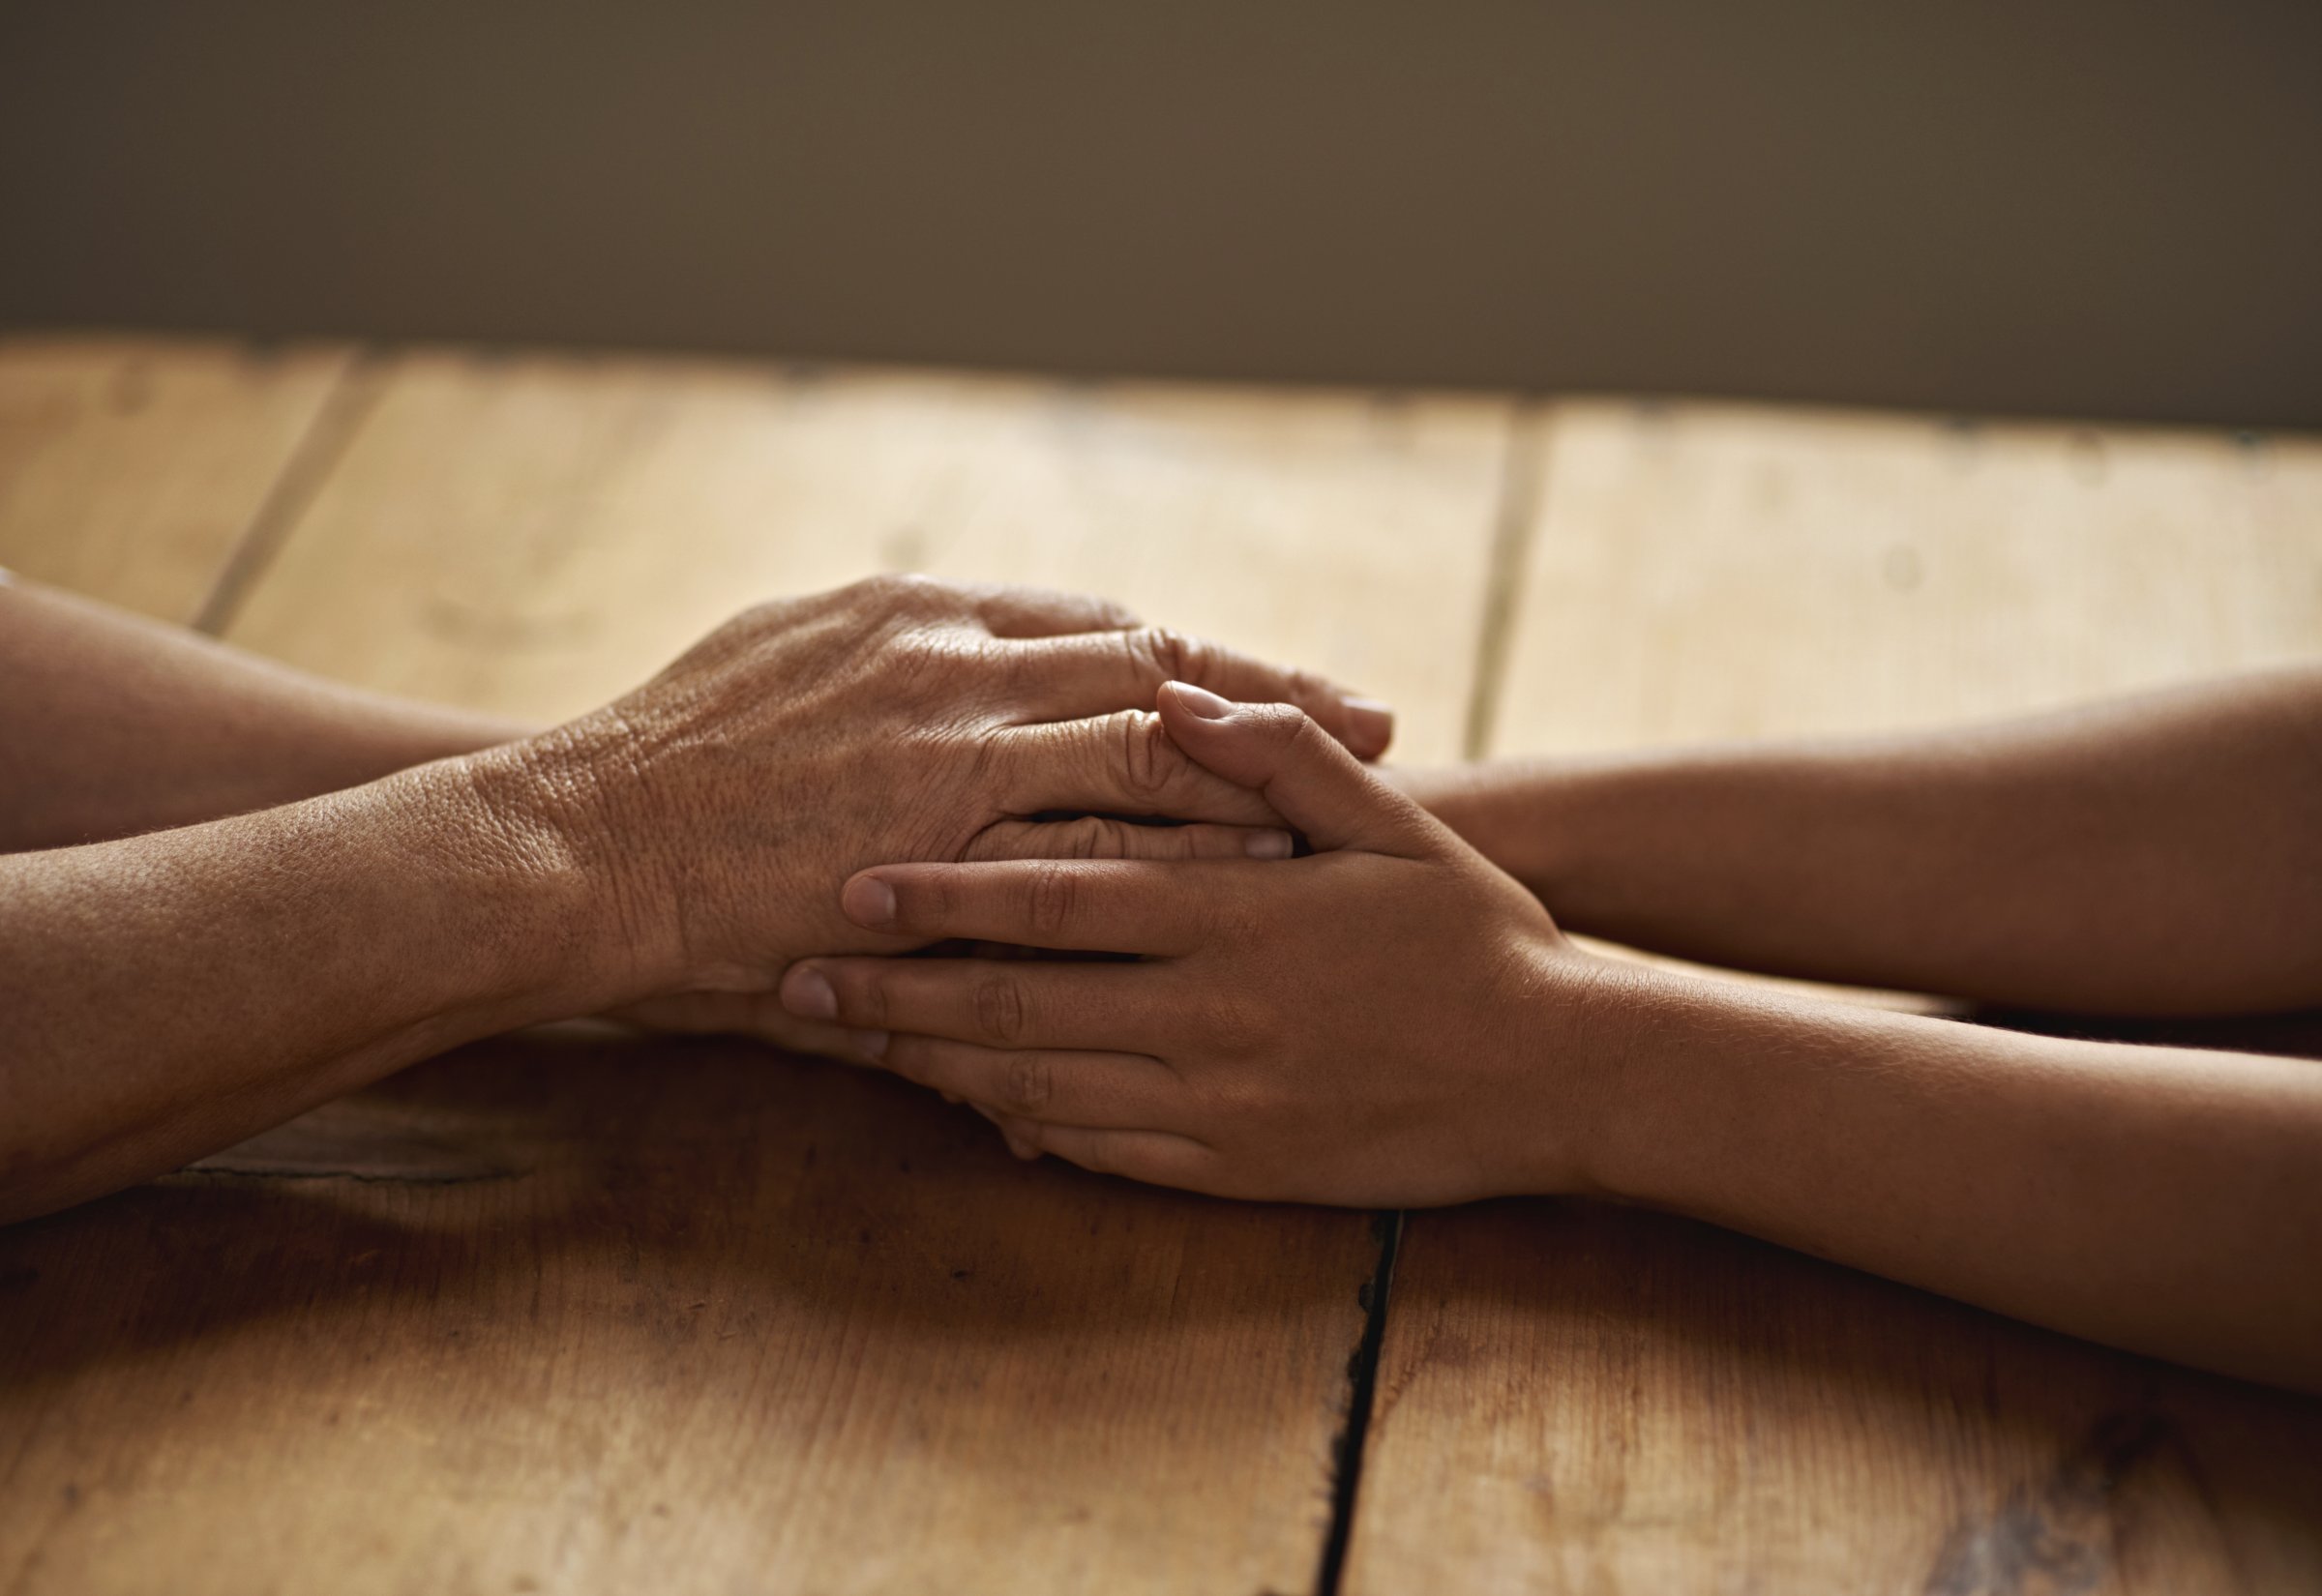 holding-hands-comforting-wooden-table